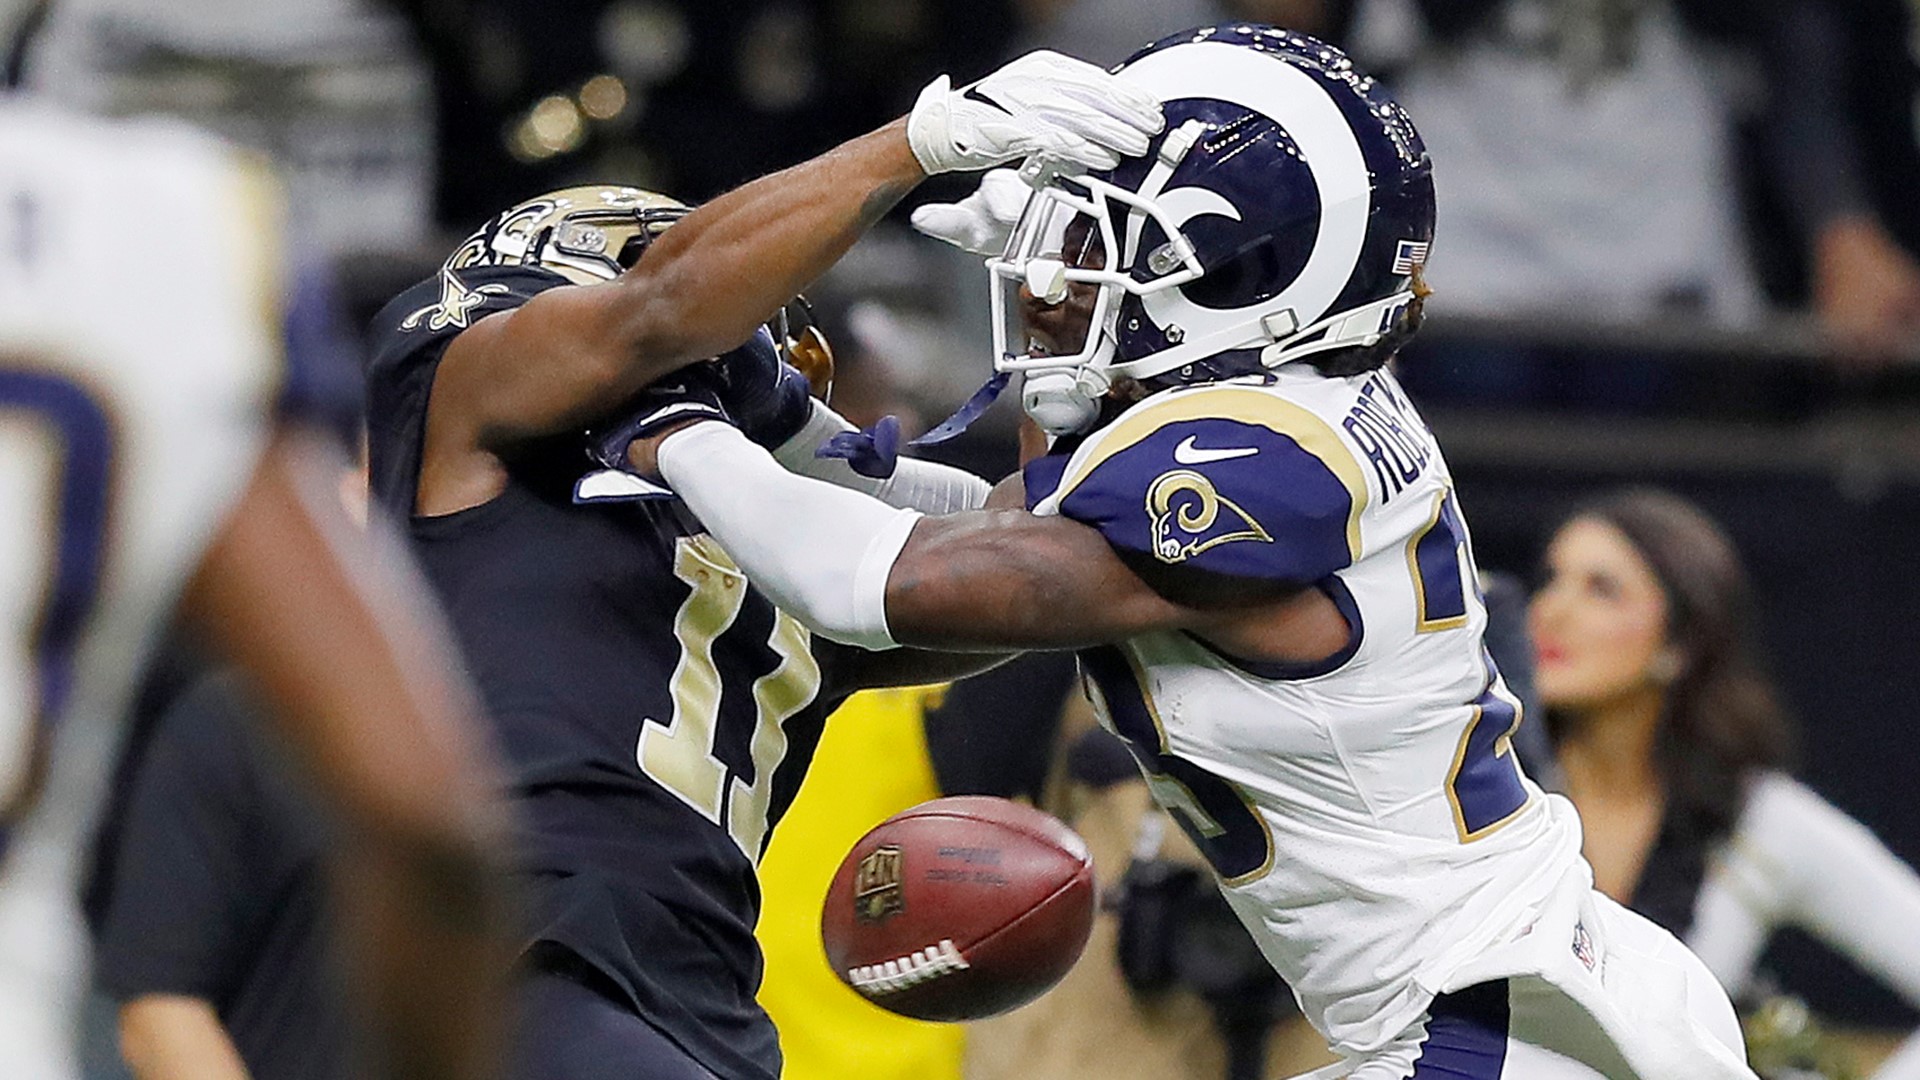 Over 500,000 people have signed an online petition for a rematch between the New Orleans Saints and the Los Angeles Rams. Looking ahead at the Super Bowl, one of its first commercials has been released.